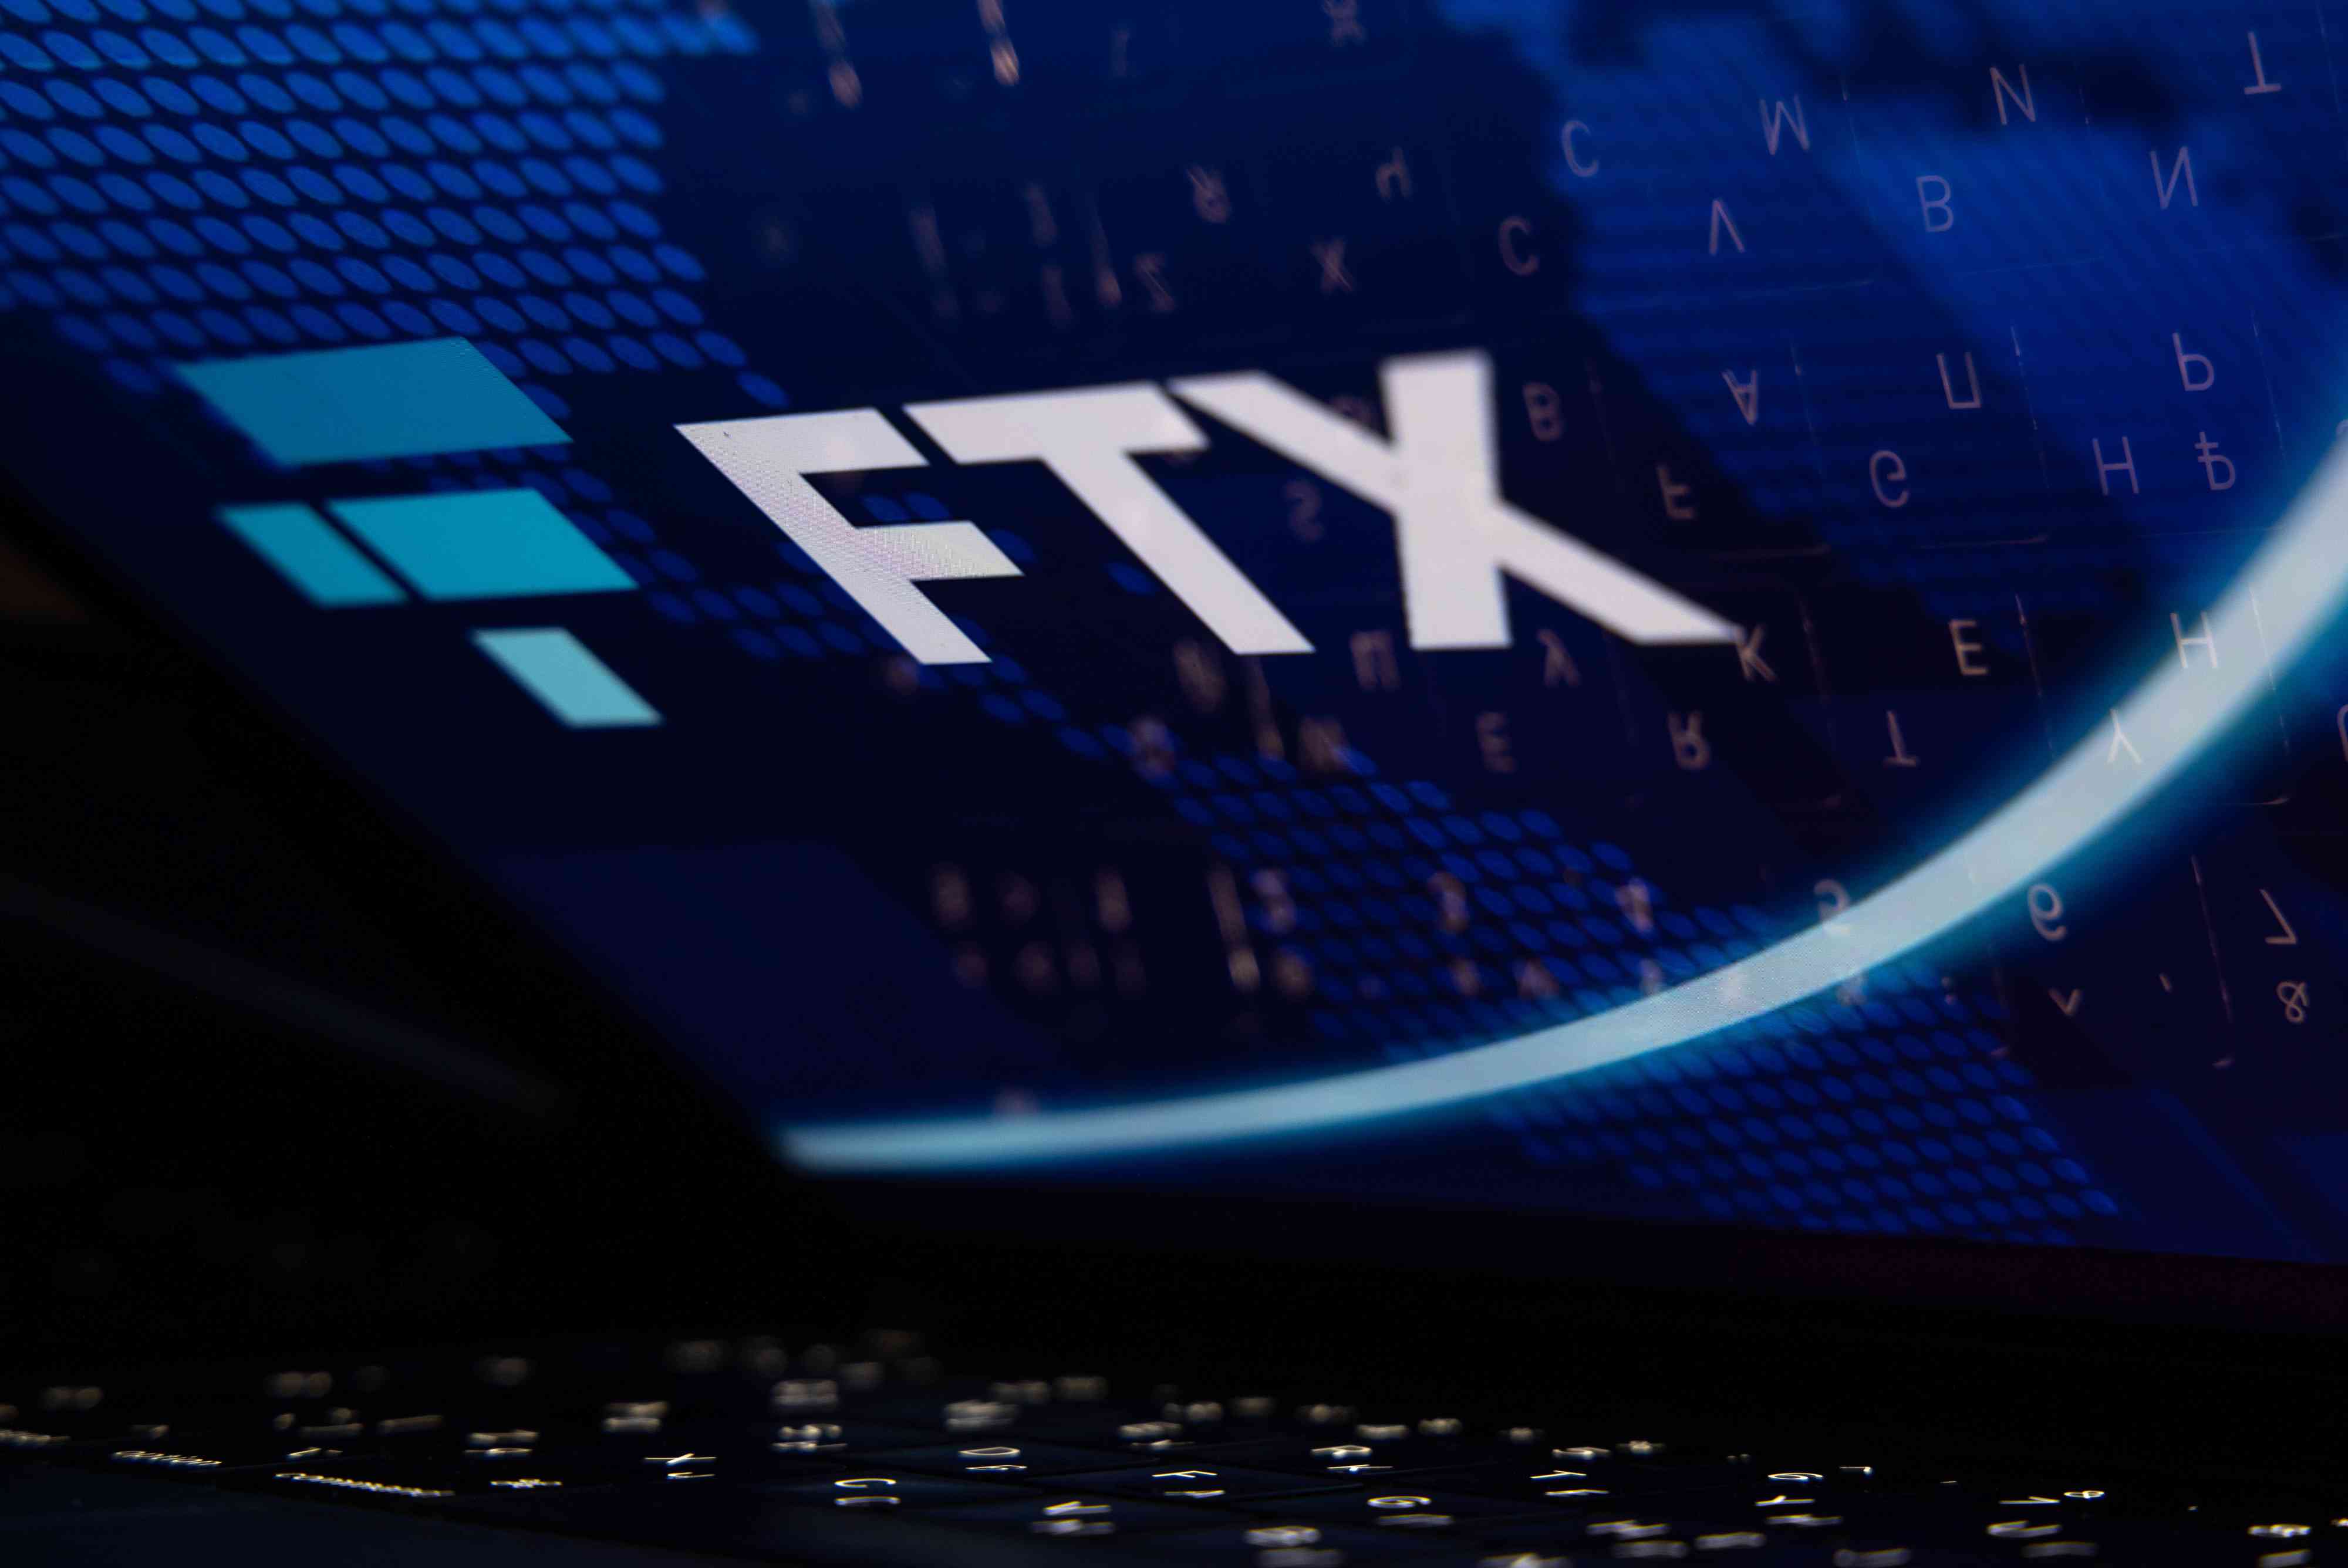 The FTX Cryptocurrency Derivatives Exchange logo on a laptop screen